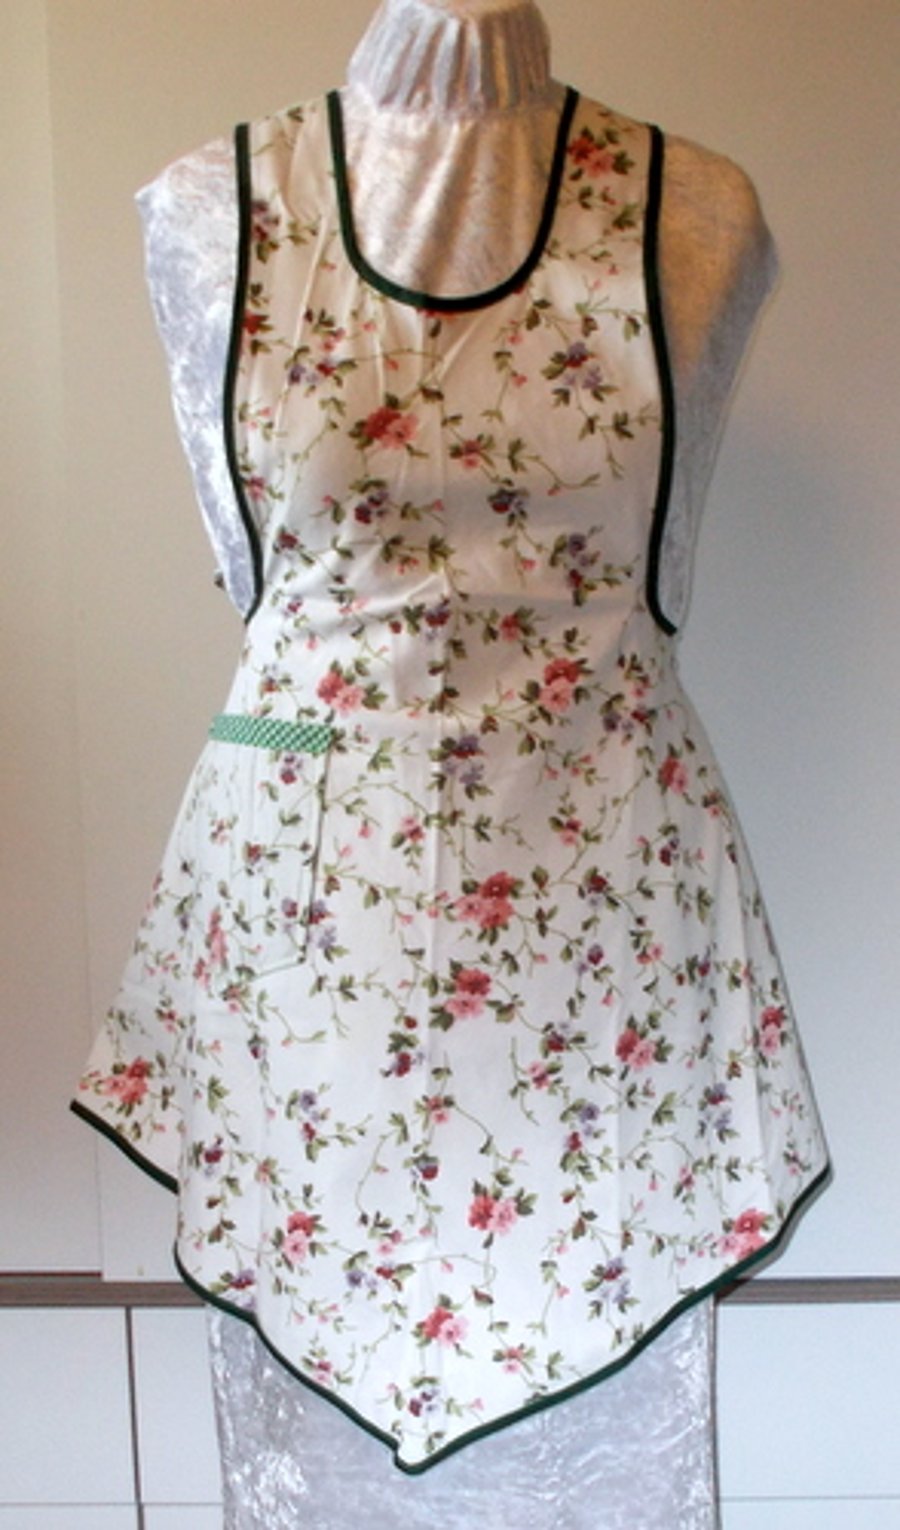 Hand made vintage style apron with print of flowers